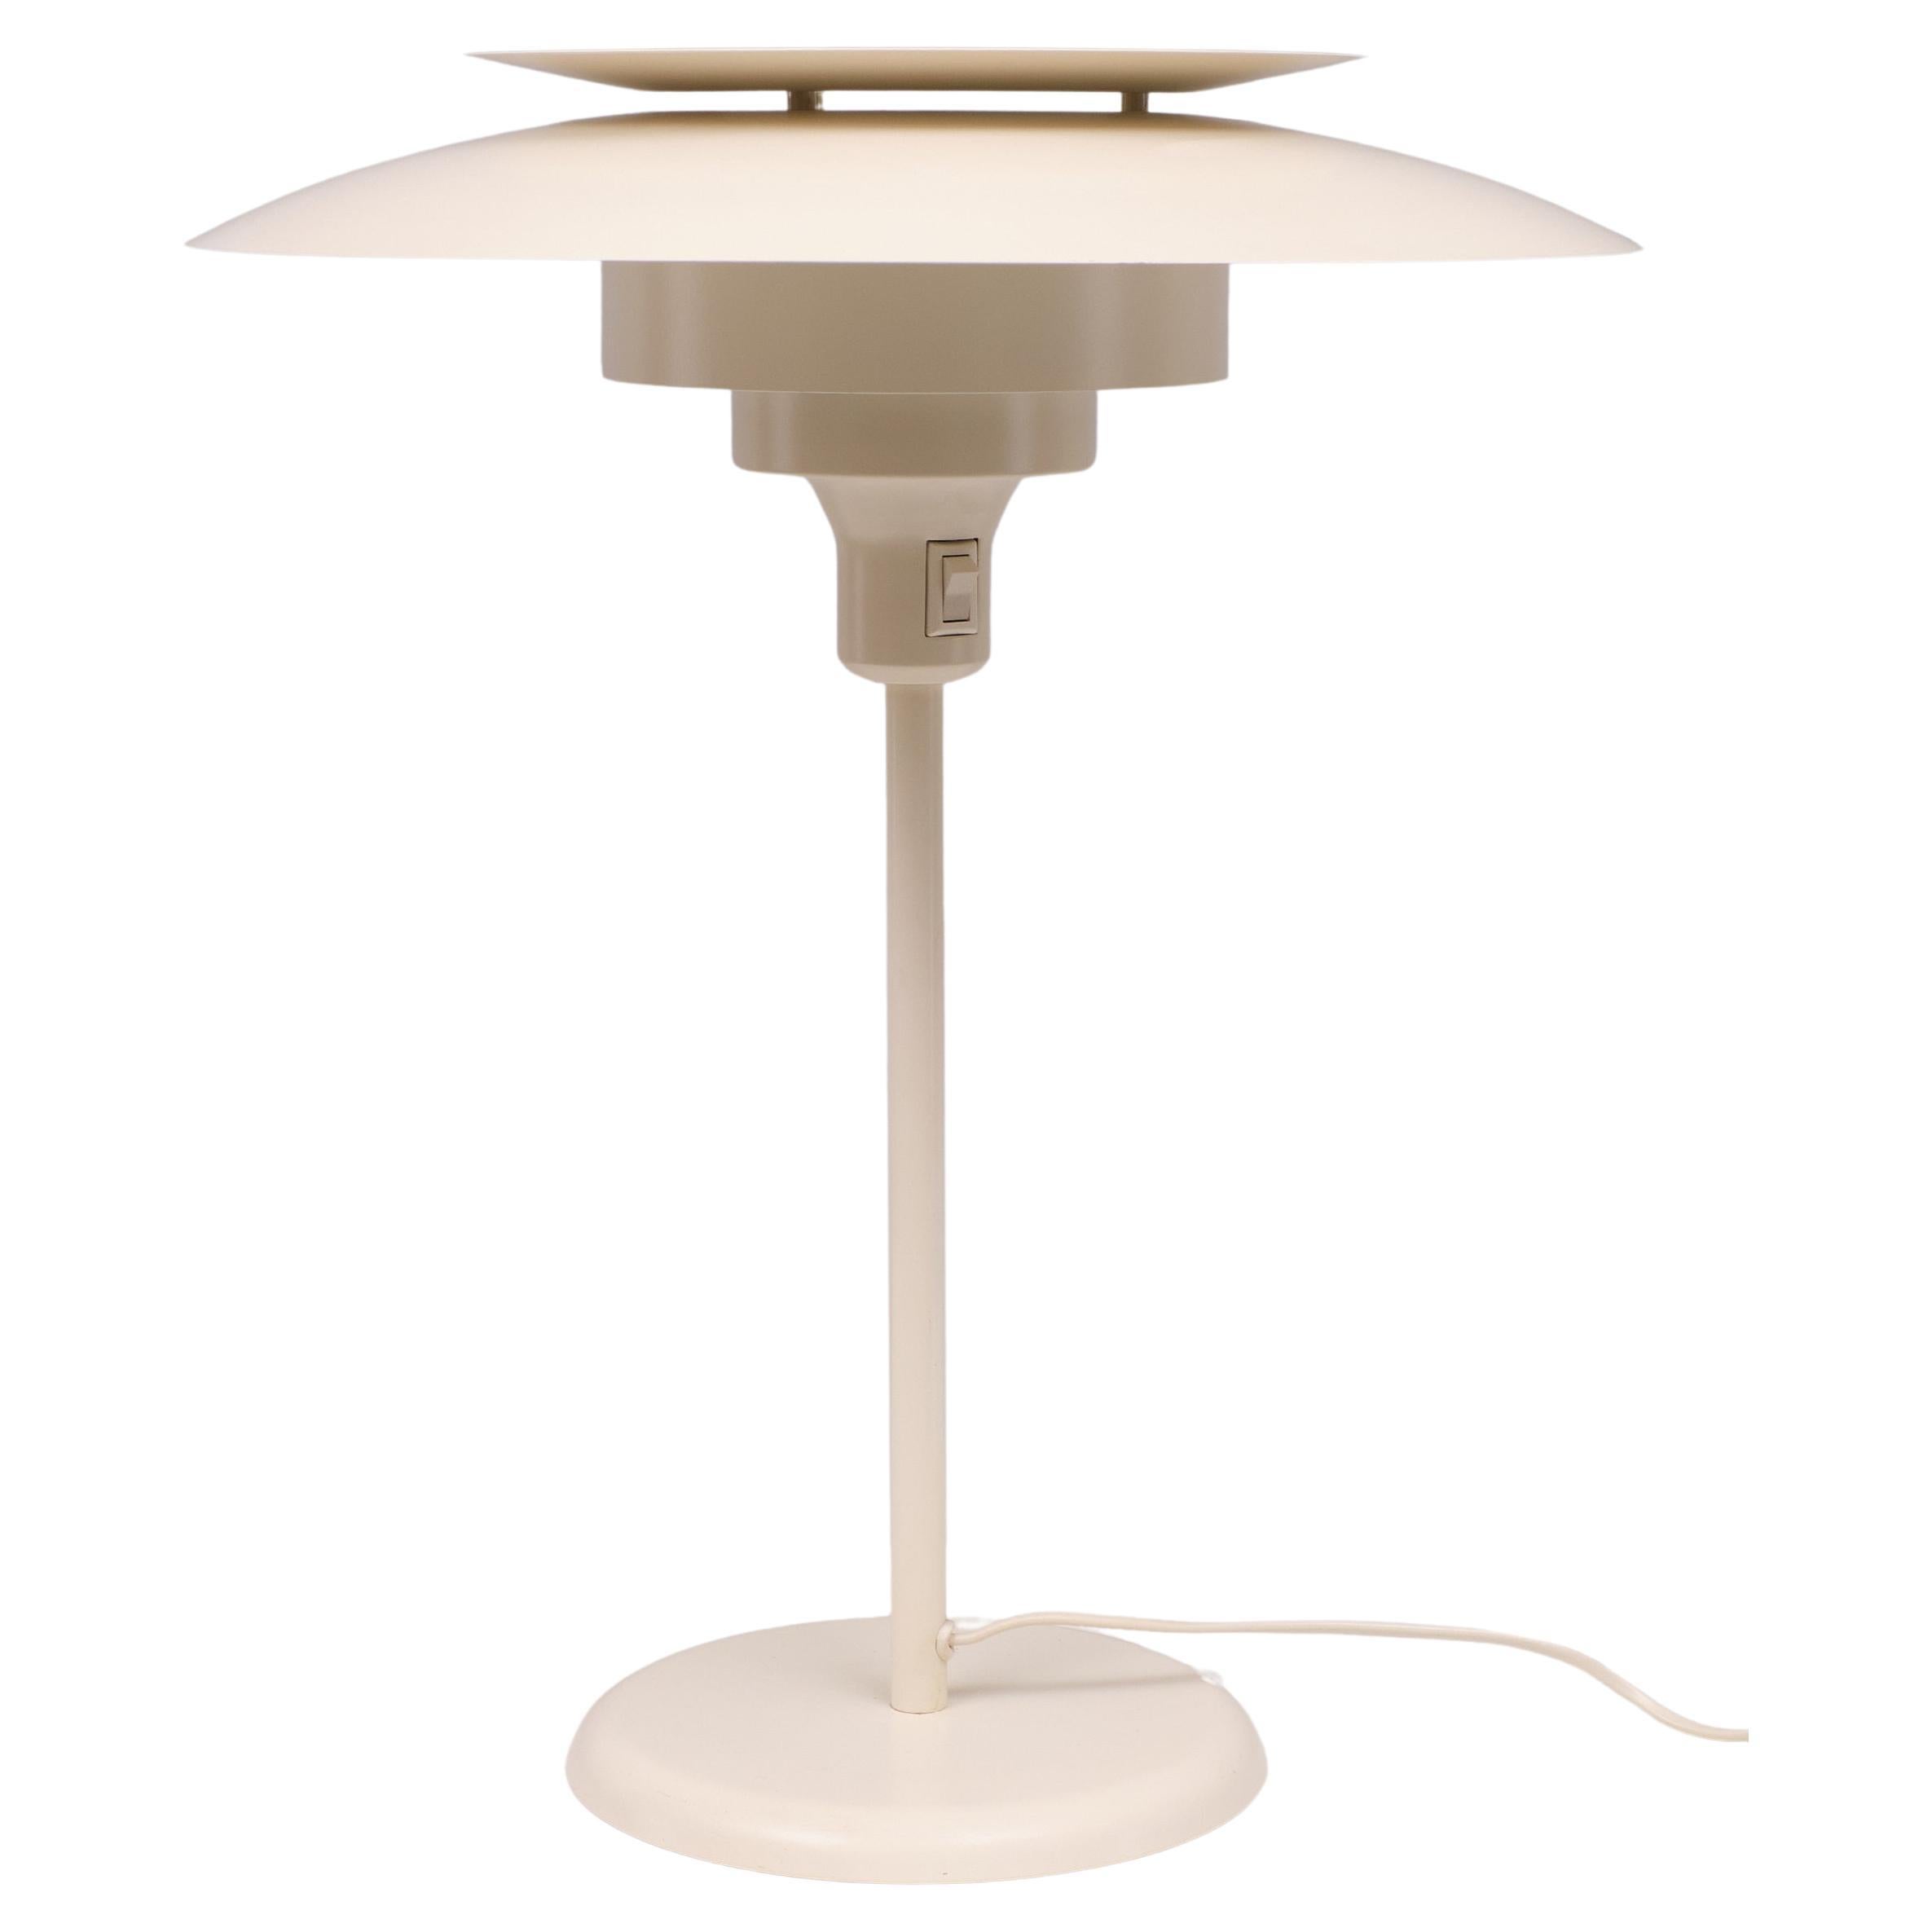 Very nice Metal table lamp,. Produced by Lyskaer Belysning .
Designed by Simon Henningsen ,The son of the Famous Paul Henningsen 
Designer of the Poulsen Lamps . Model 2015 .
Very good condition . signed . Off White color . 